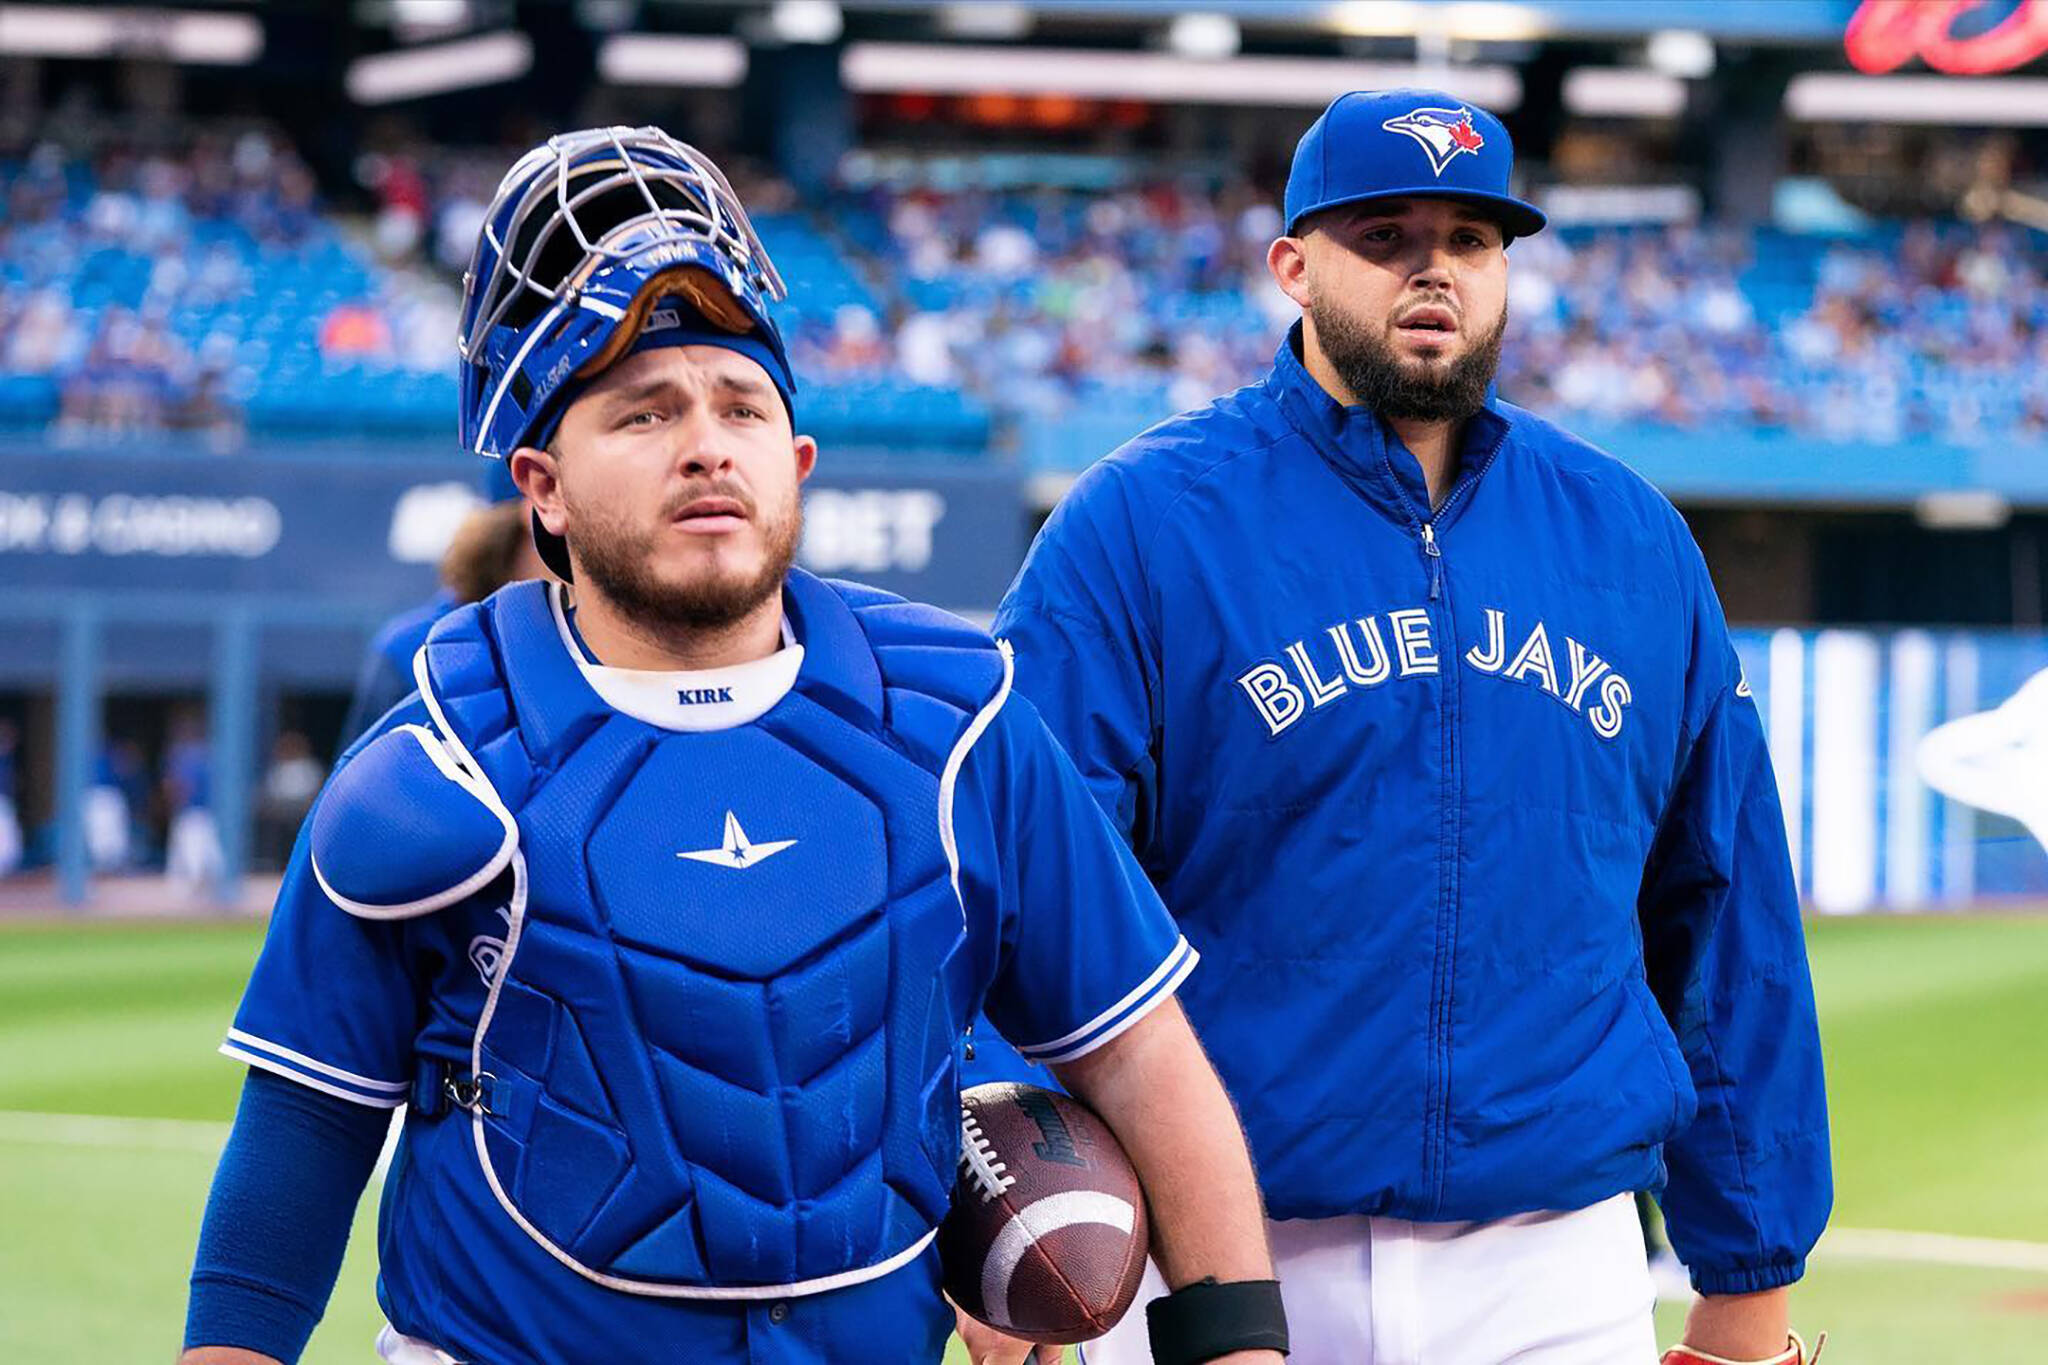 Toronto Blue Jays pitcher hailed for going after fat-shaming jerk on Twitter